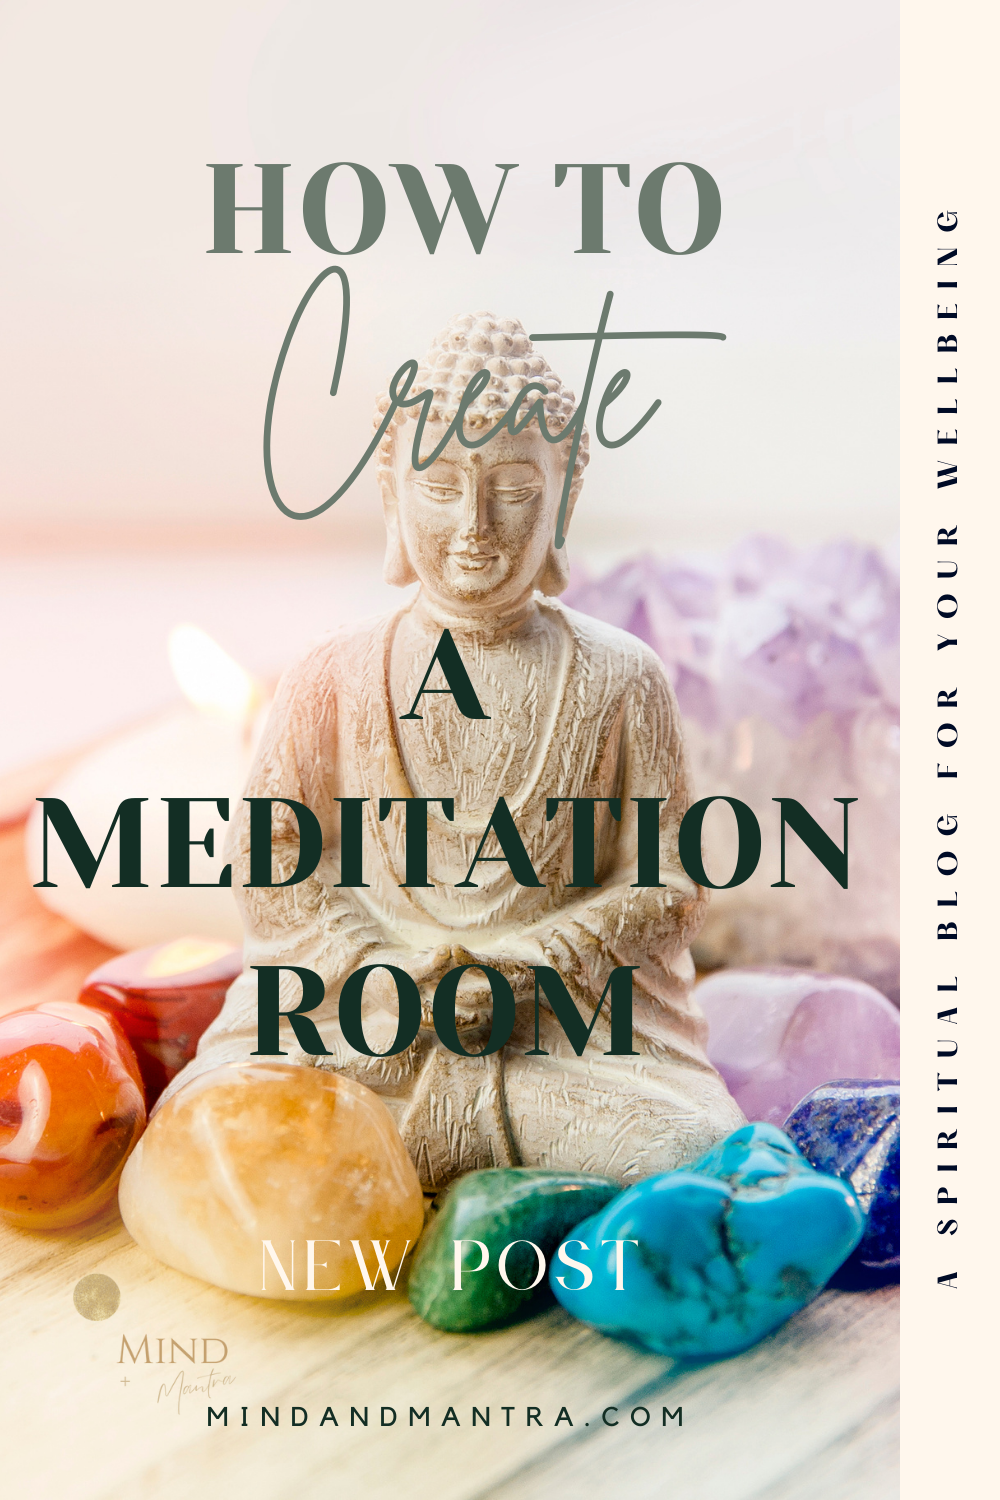 How+to+create+a+meditation+room+with+ideas+and+meditation+decor+(5).png